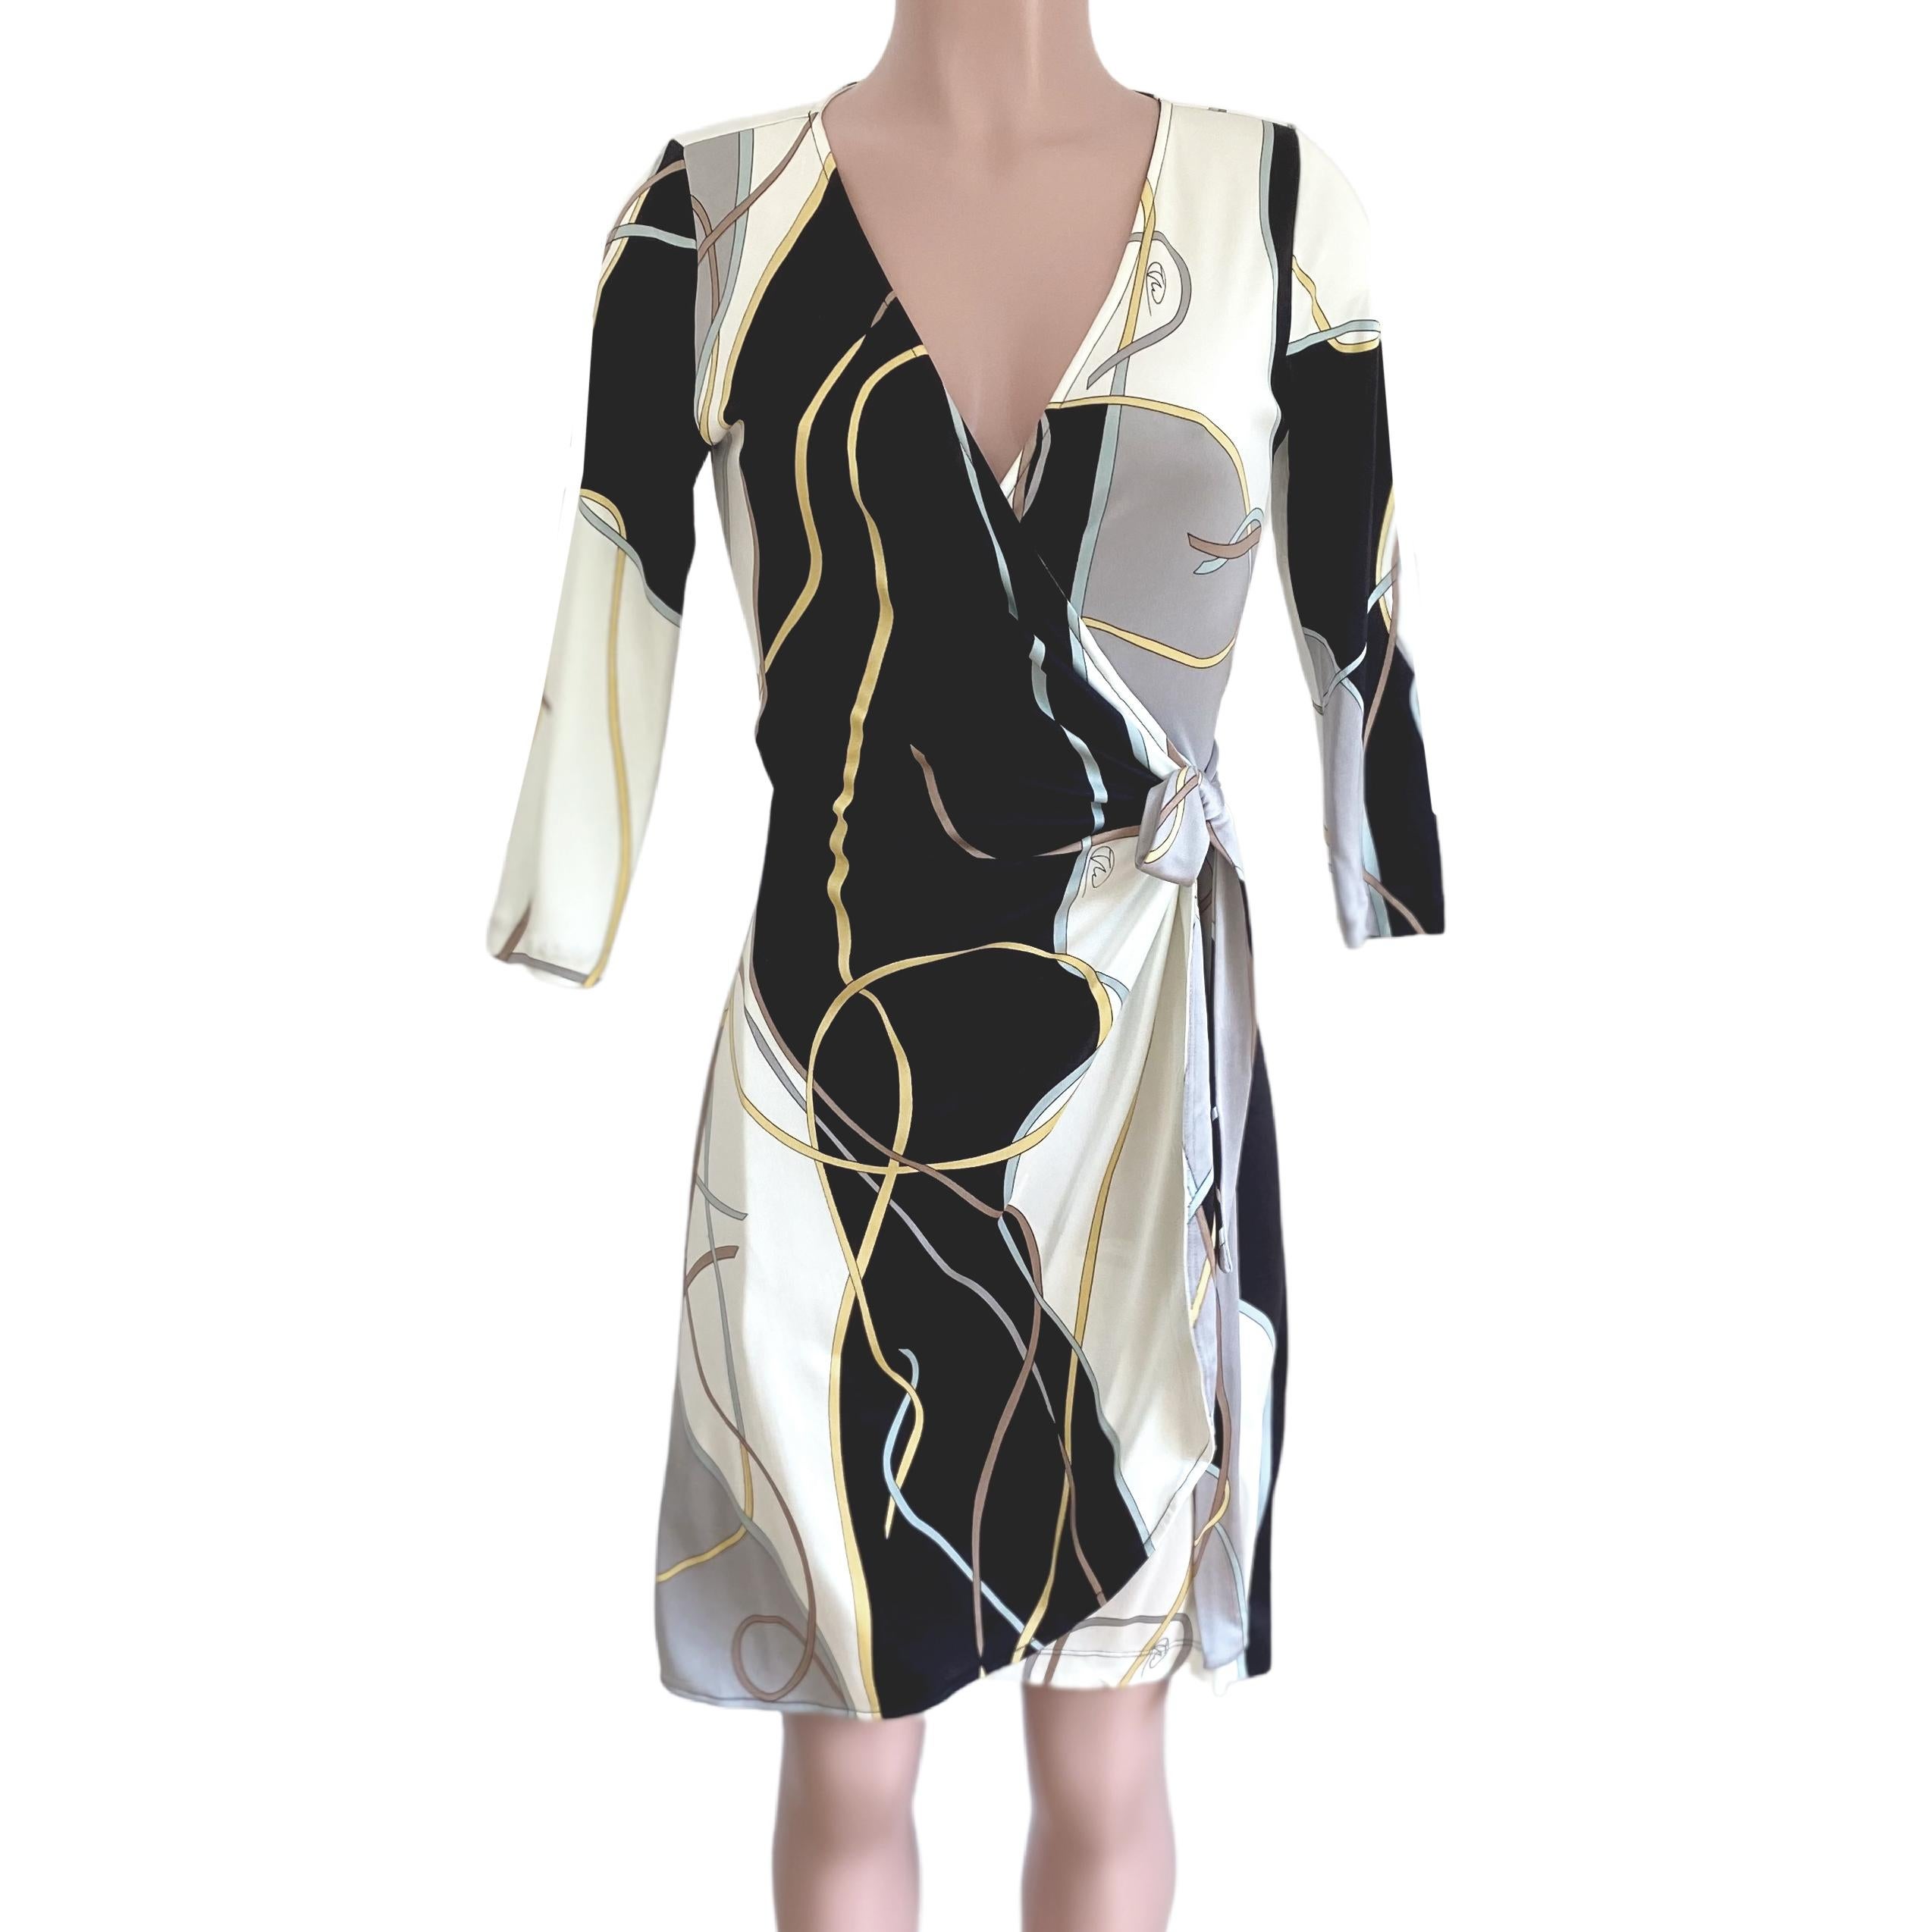 From FLORA KUNG collection - New with tag.
True wrap dress with 3/4 bell sleeves, in Flora's original ribbon print.
Flattering true wrap.
Authentic FLORA KUNG silk dresses are made in premiere quality, long-filament silk yarn which gives a natural